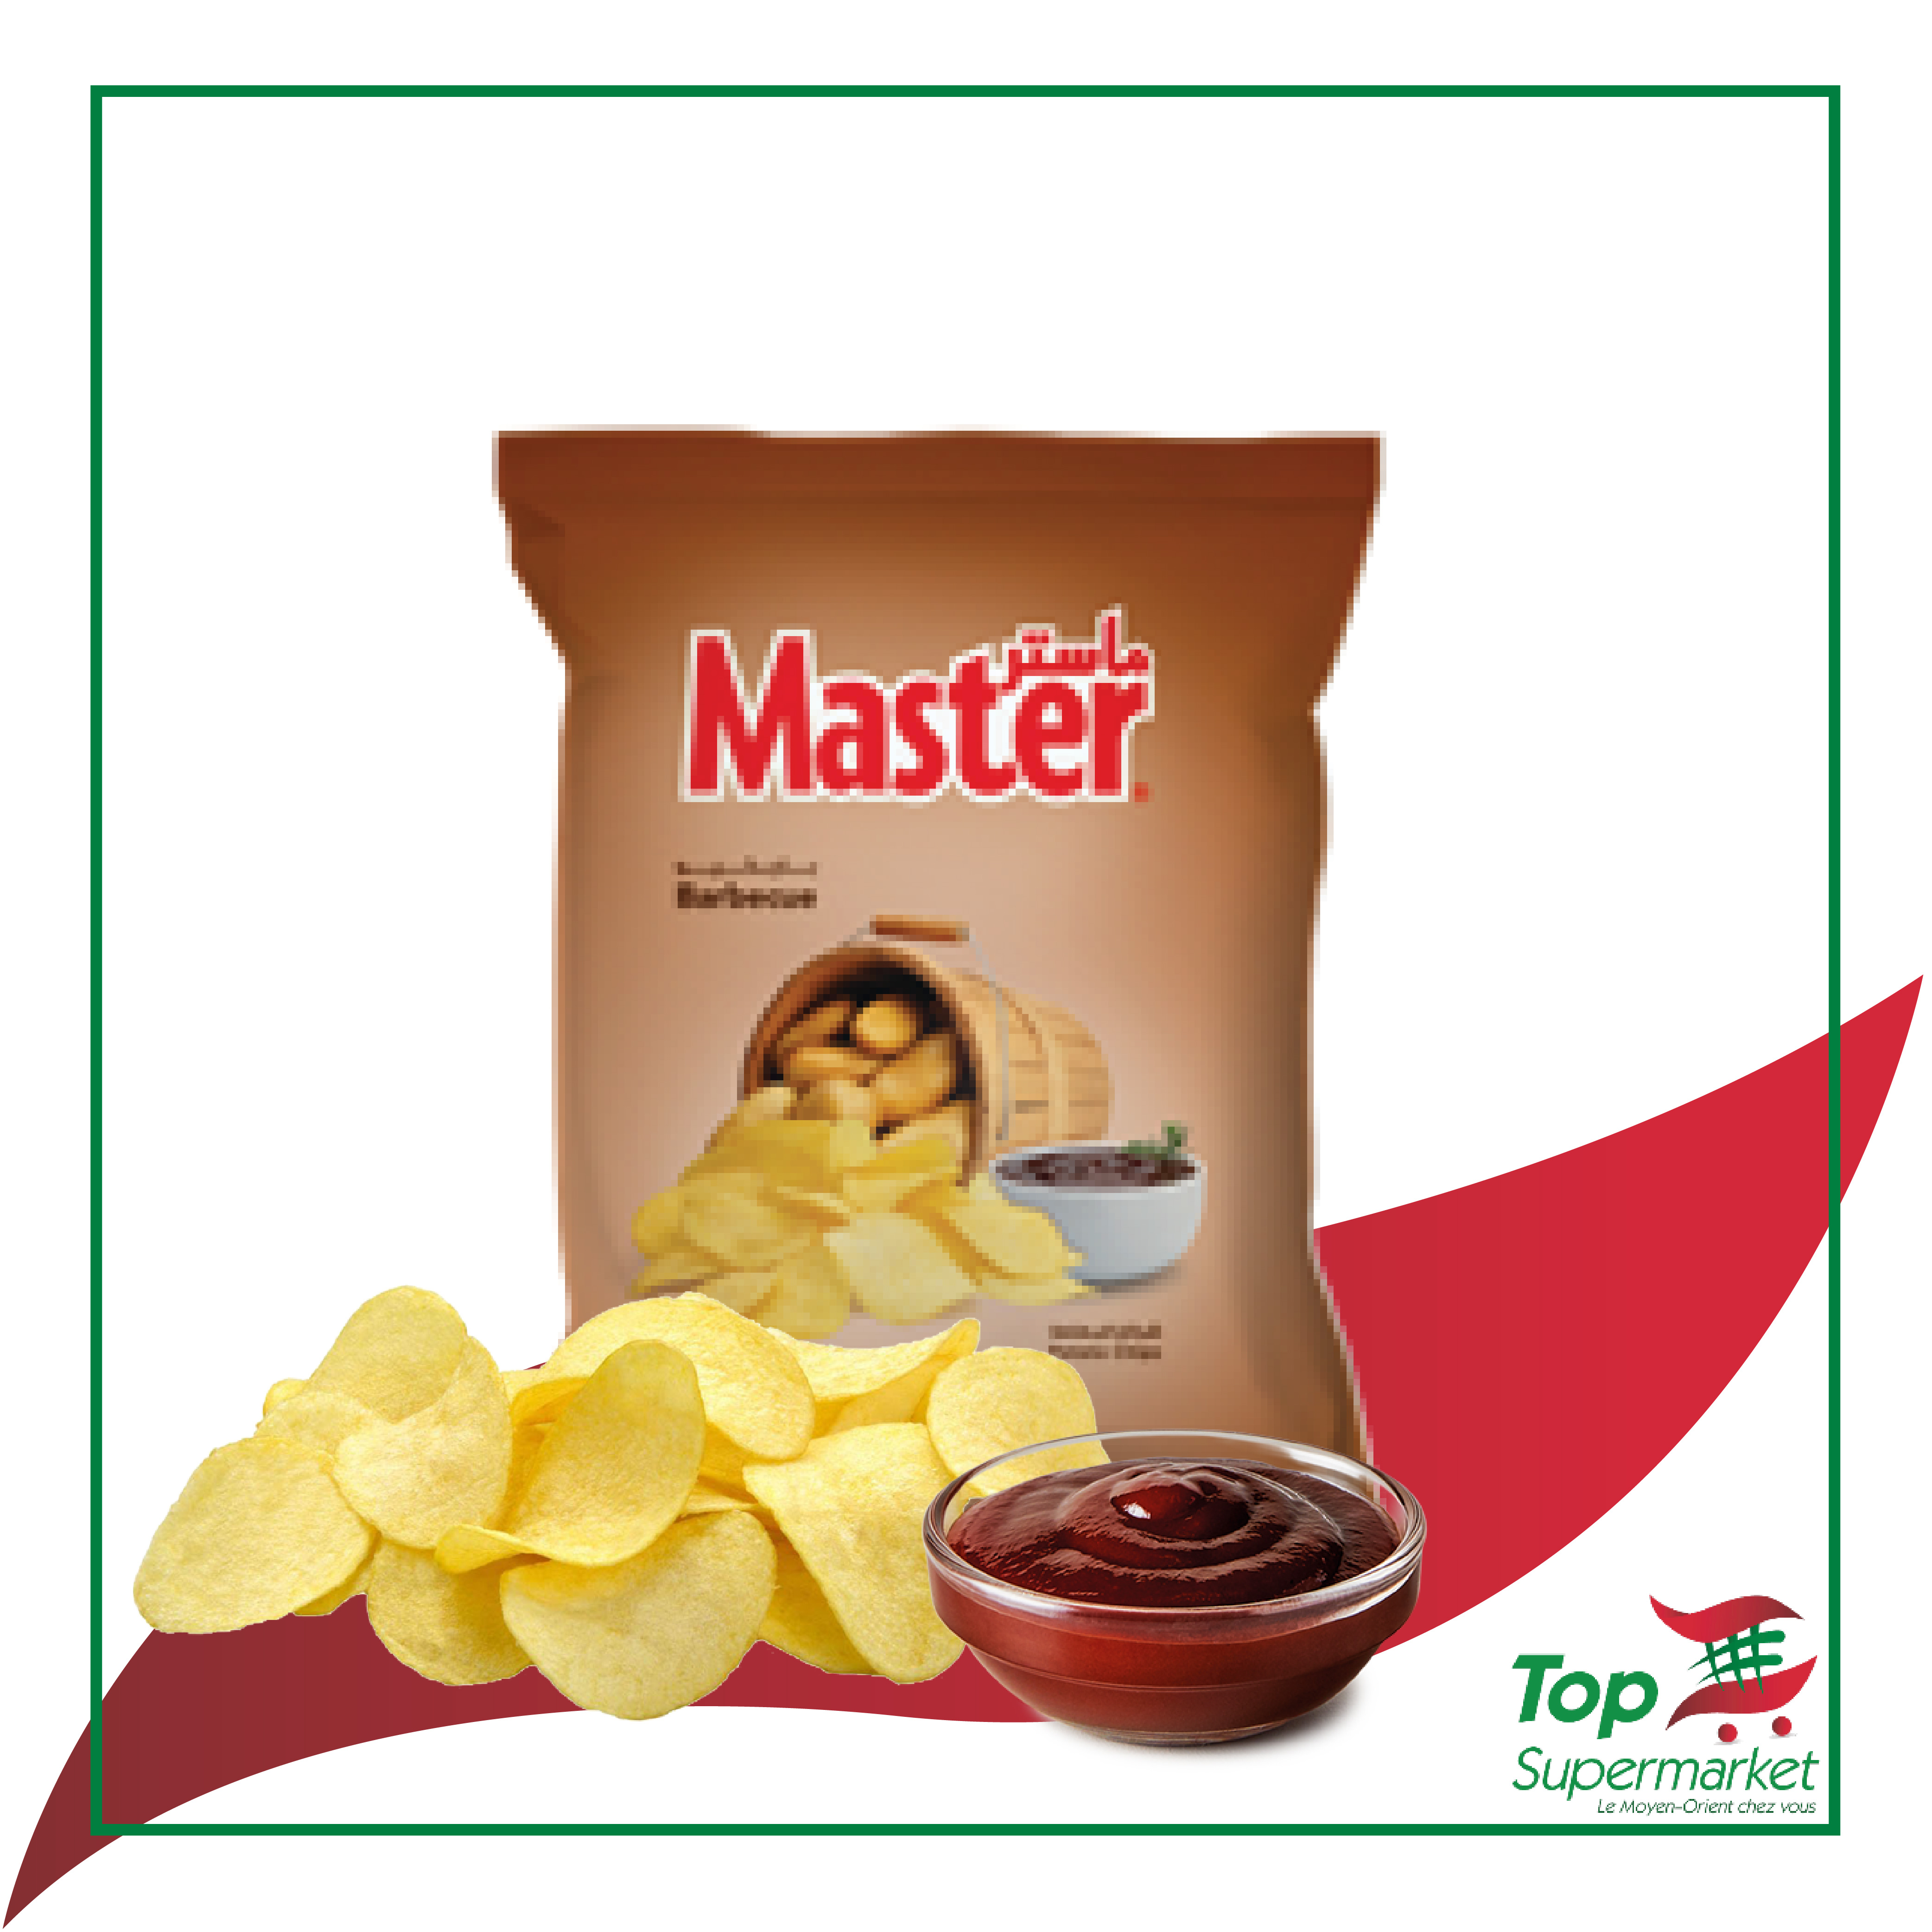 Master Chips Barbecue 37gr